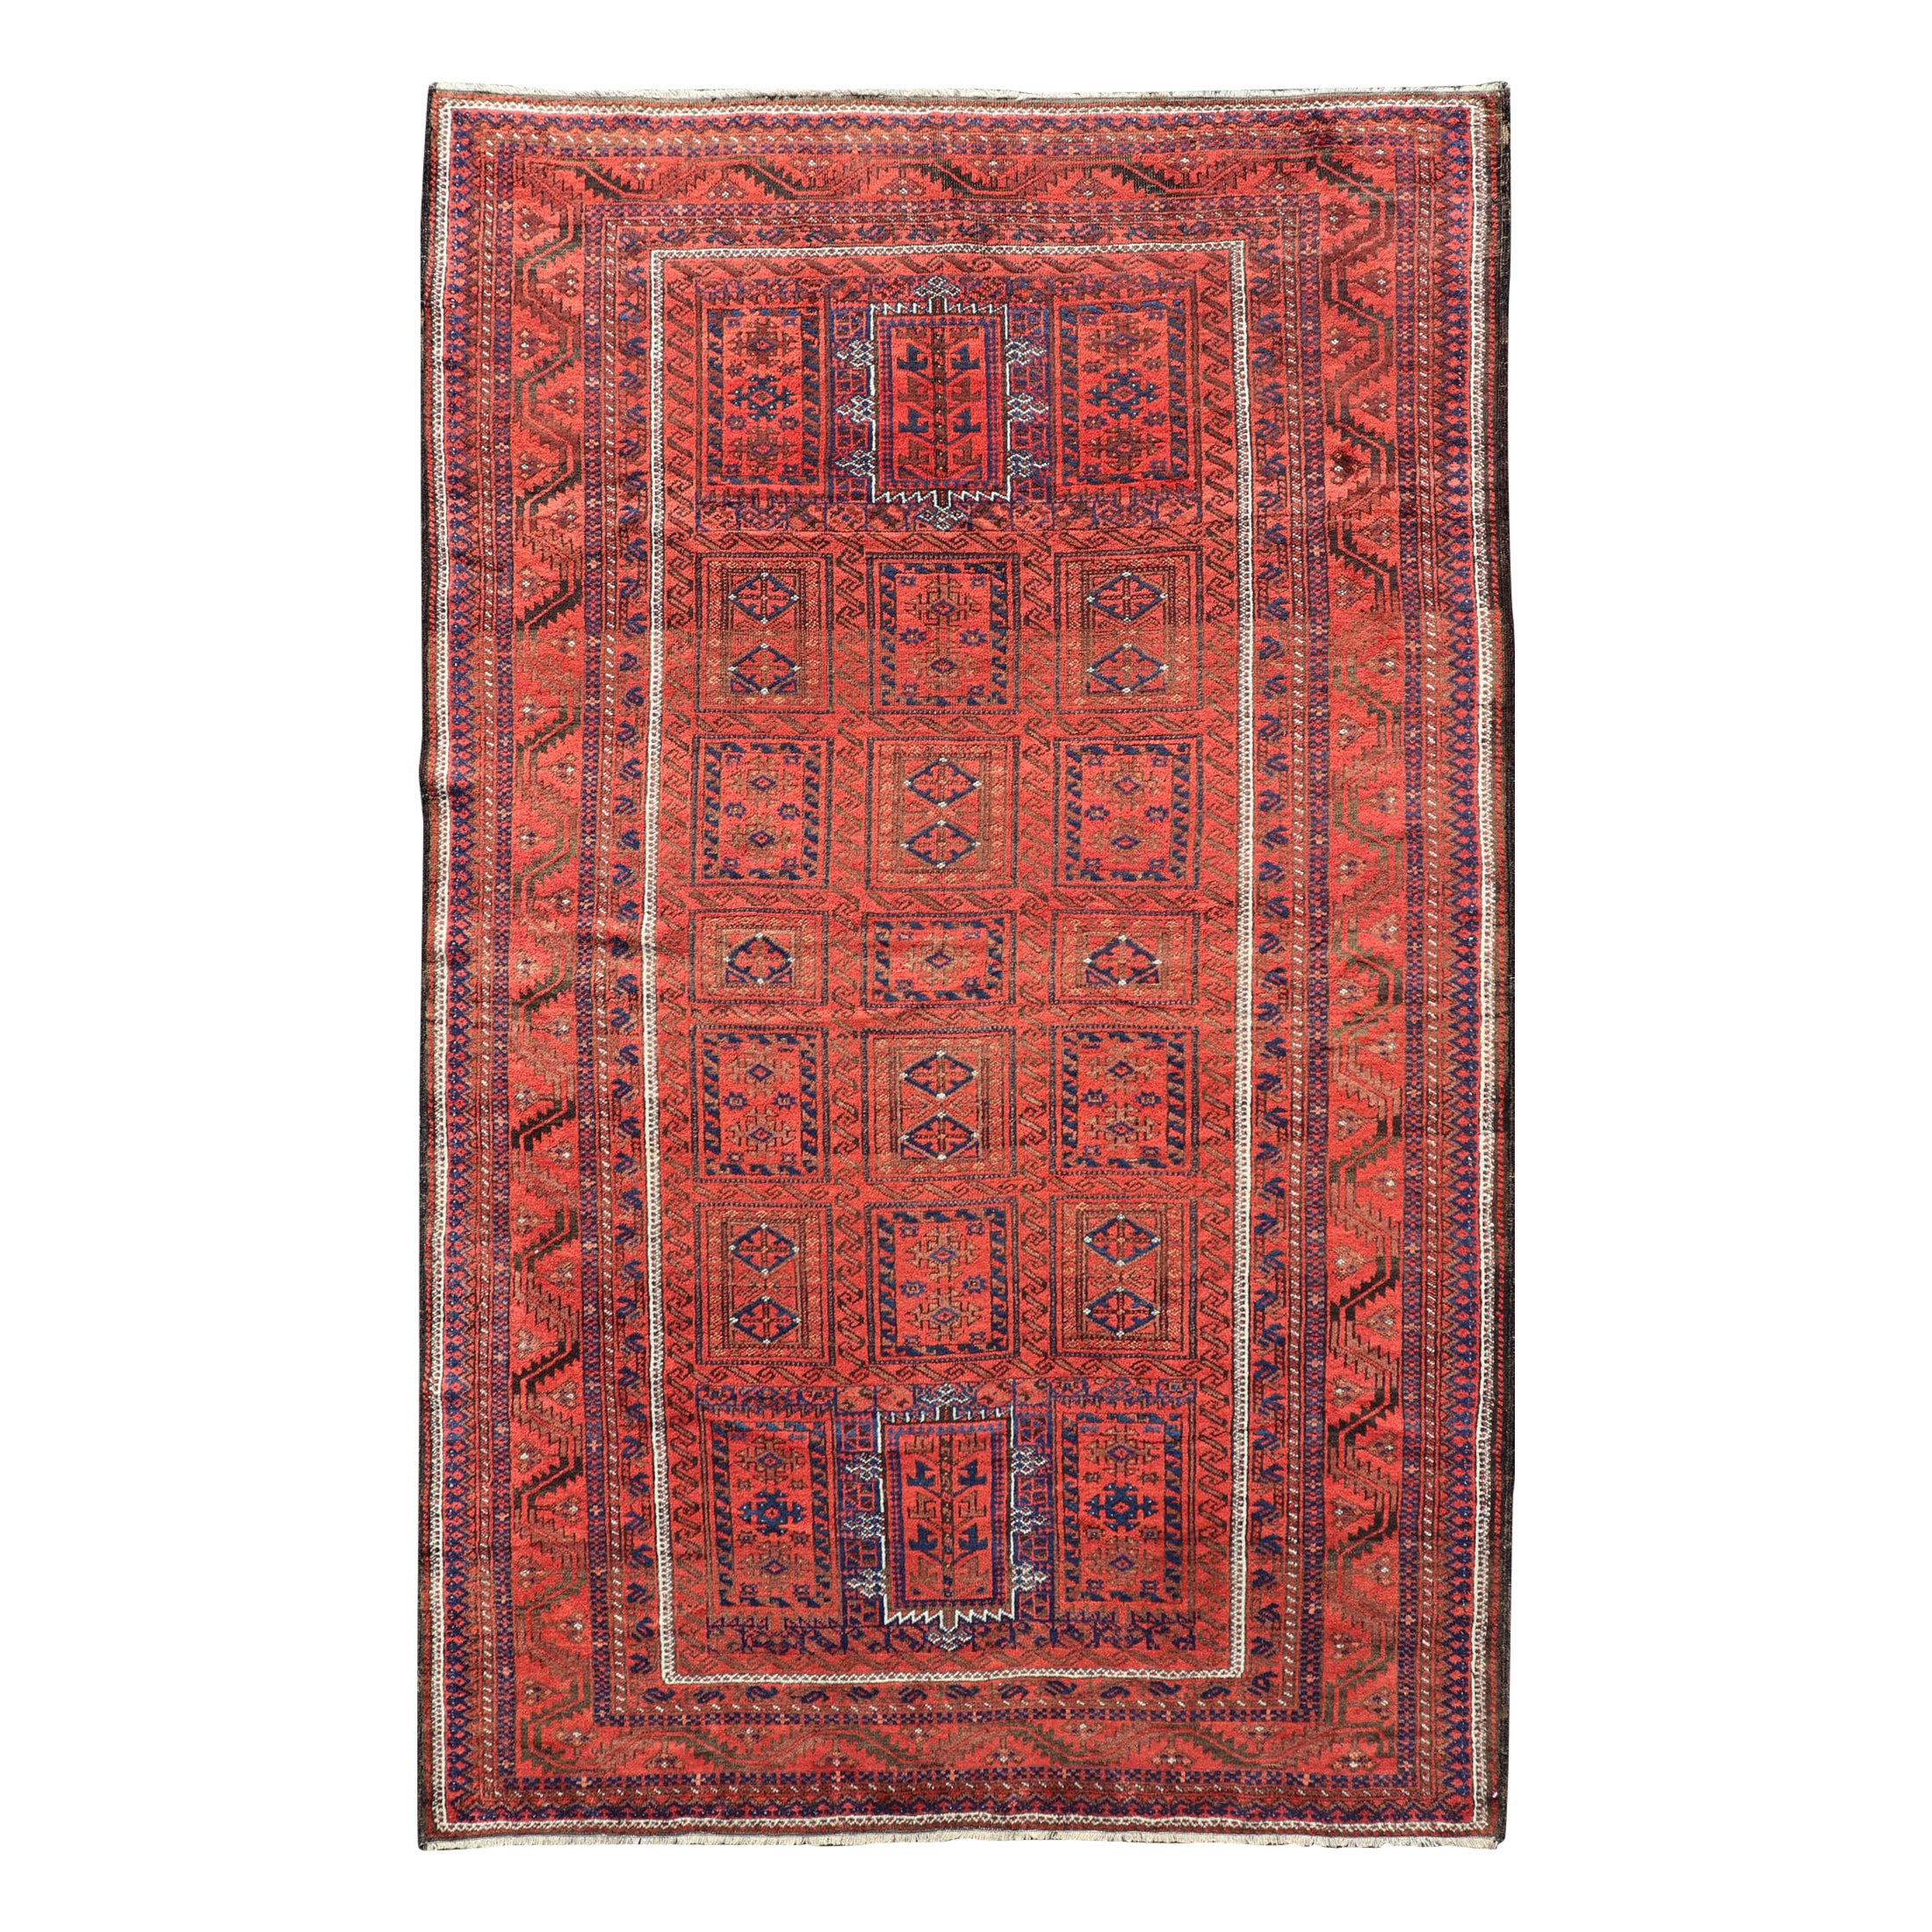 Antique Baluch Tribal Rug with All-Over Geometric Diamond Design in Red